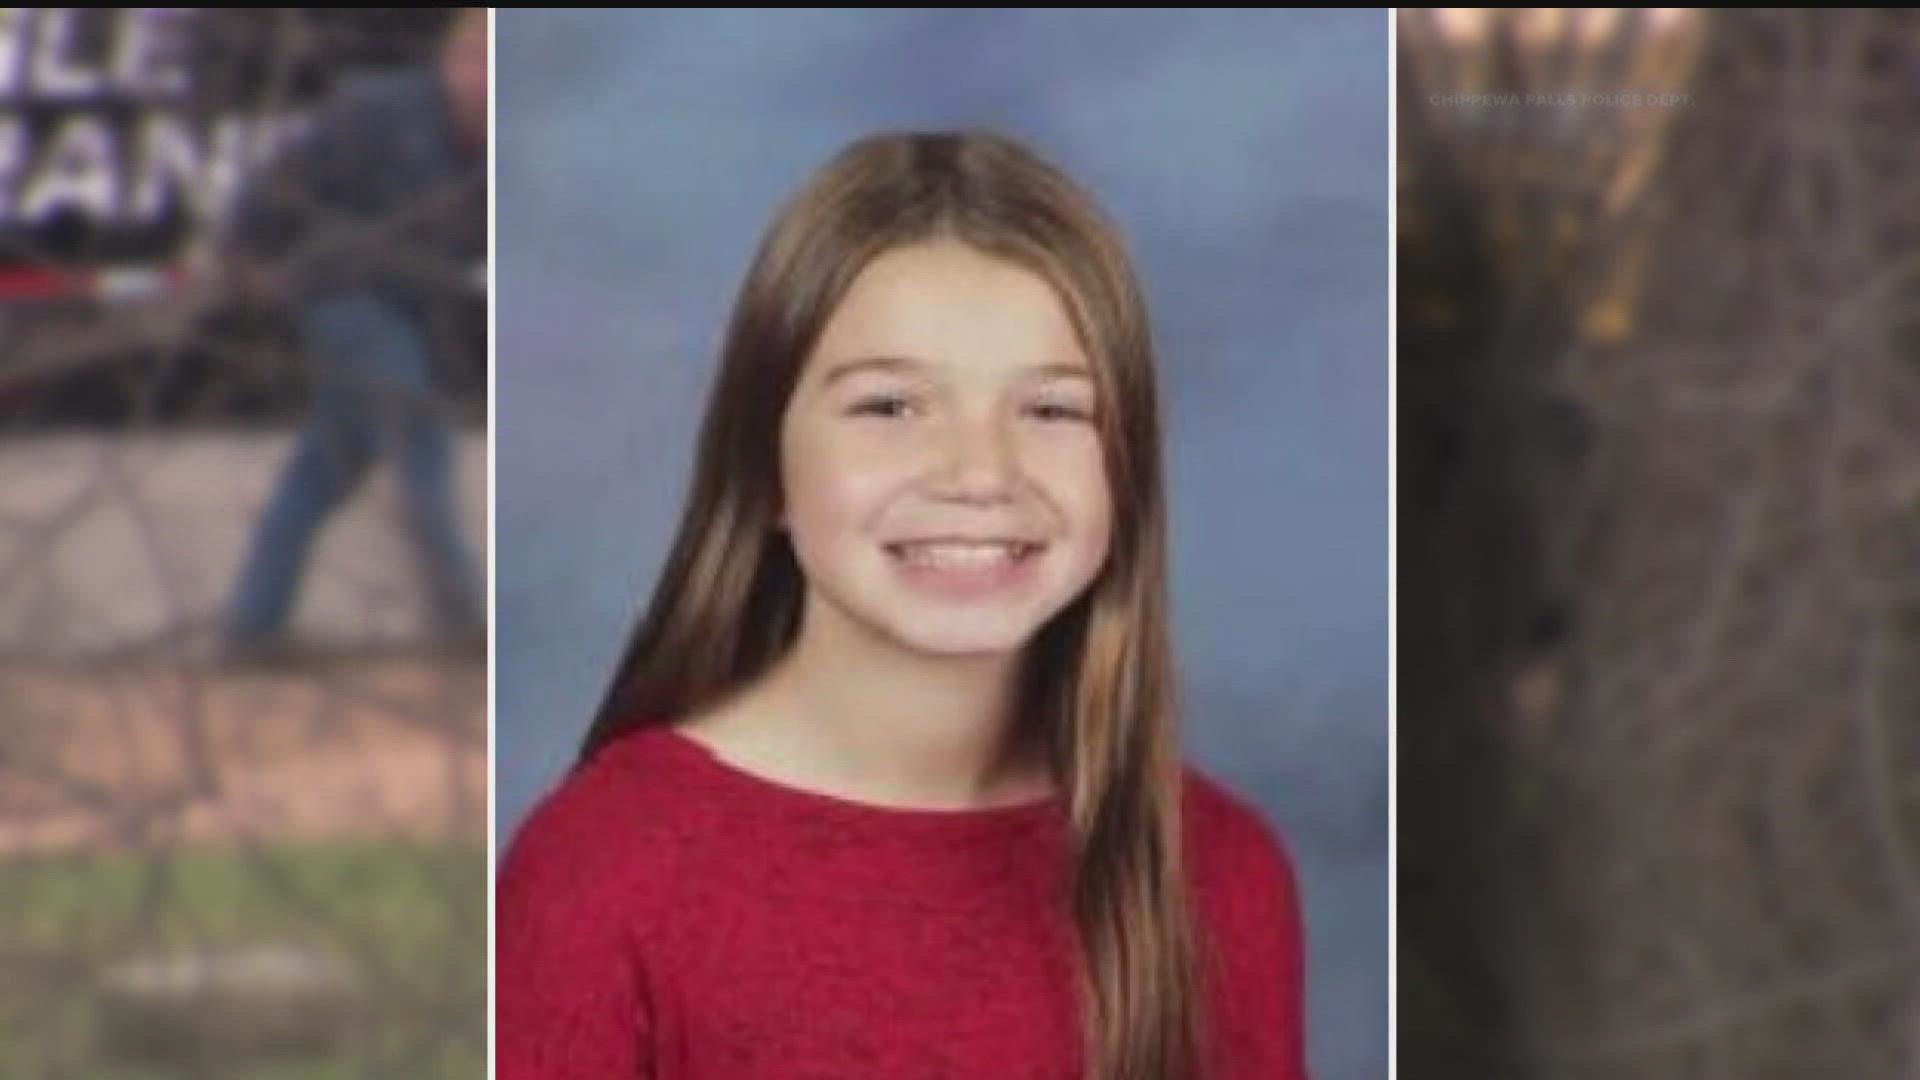 The killing of 10-year-old Lily Peters rocked the city of 13,000, prompting its residents to demand justice for Peters while still continuing to grieve.